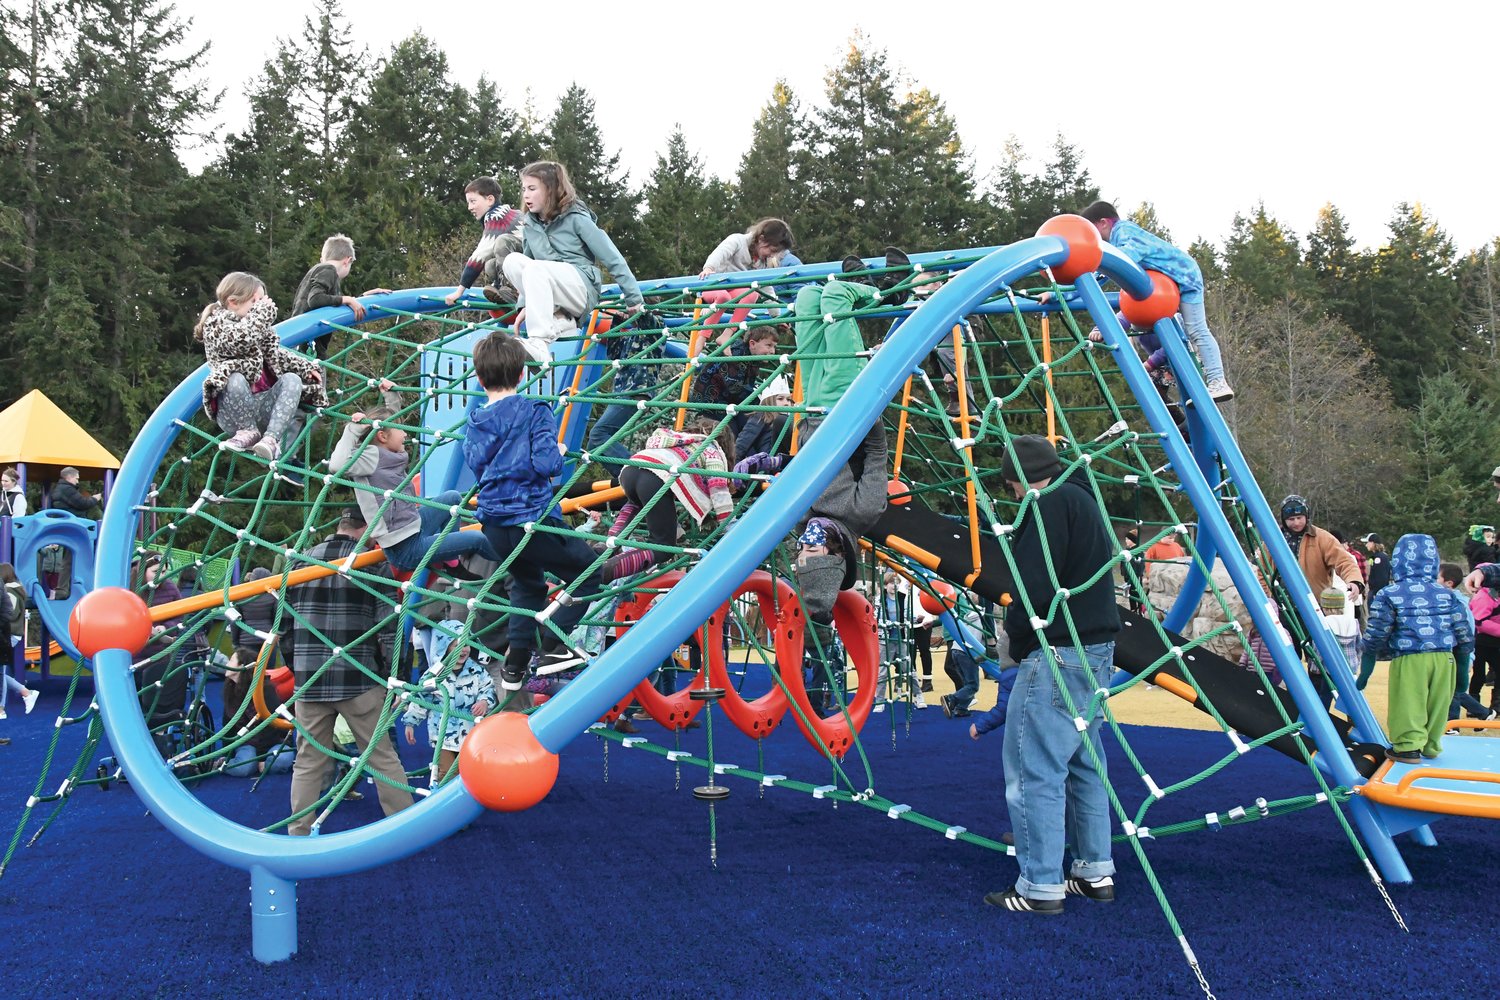 The play space was designed to provide a wide range of structures that youth of all abilities can interact with.